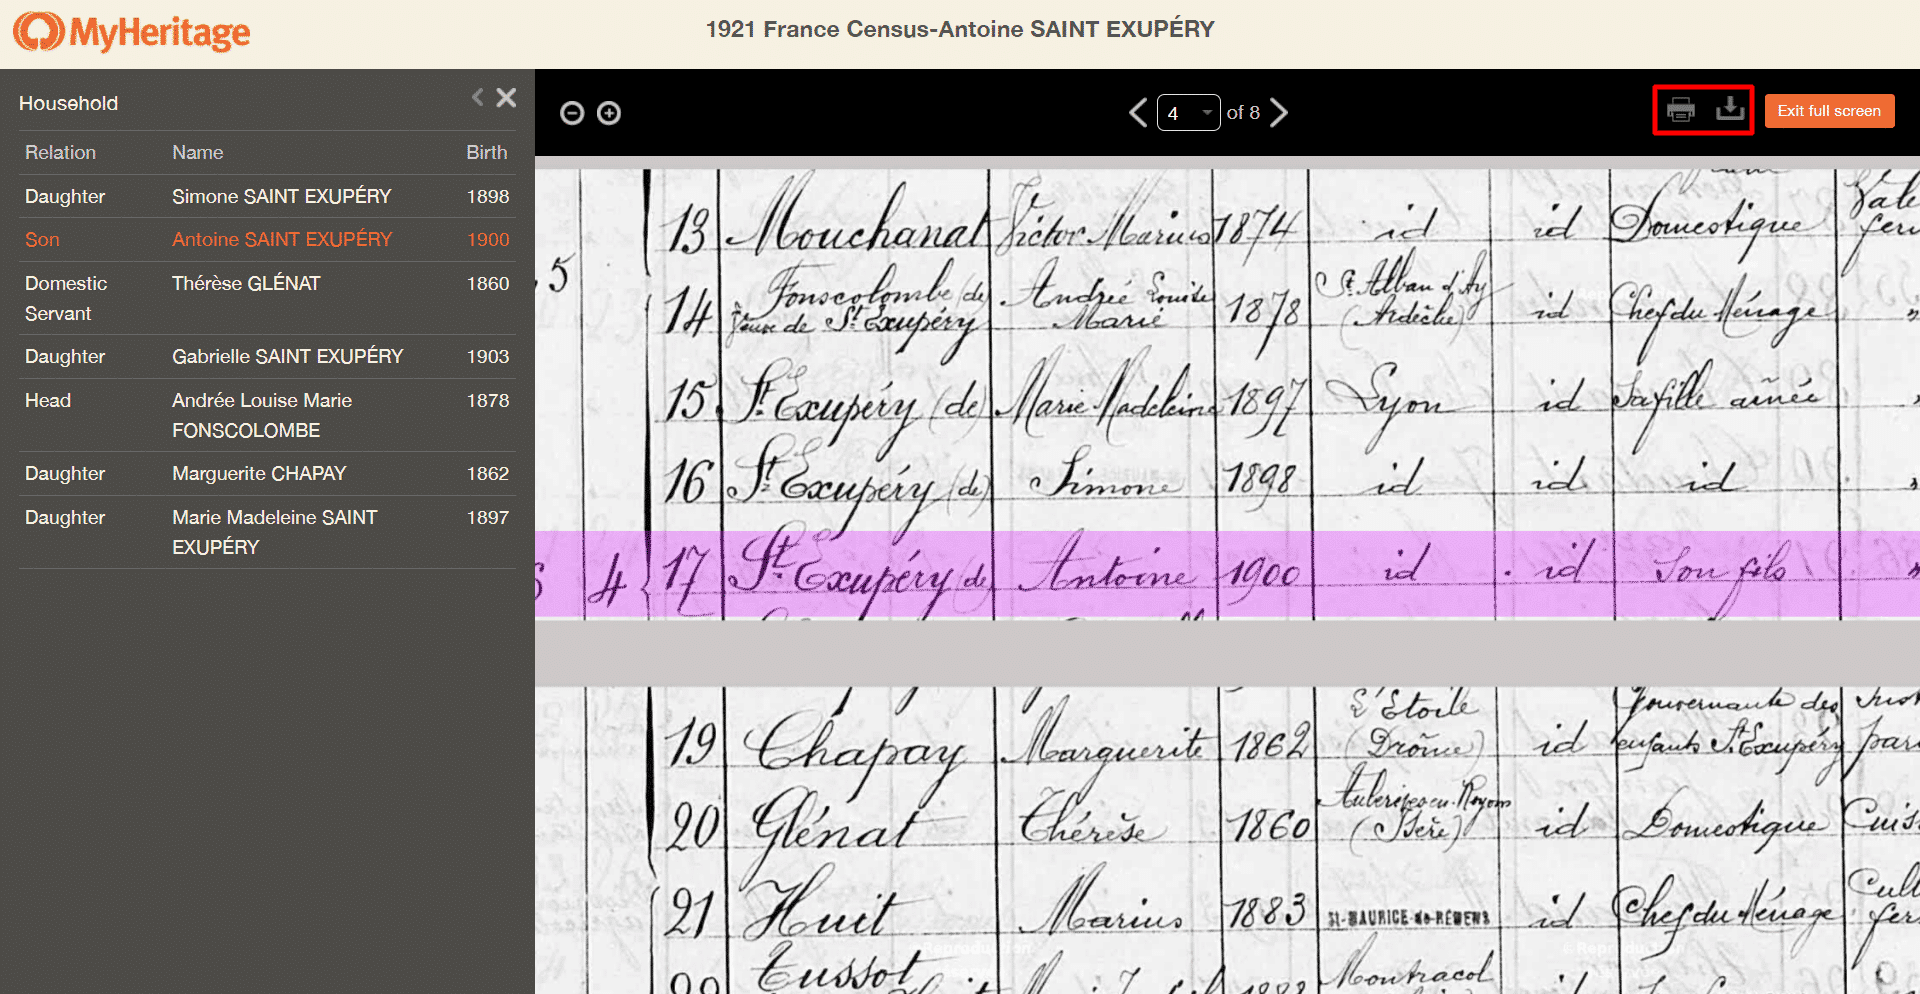 Viewing a census record in full screen mode on MyHeritage